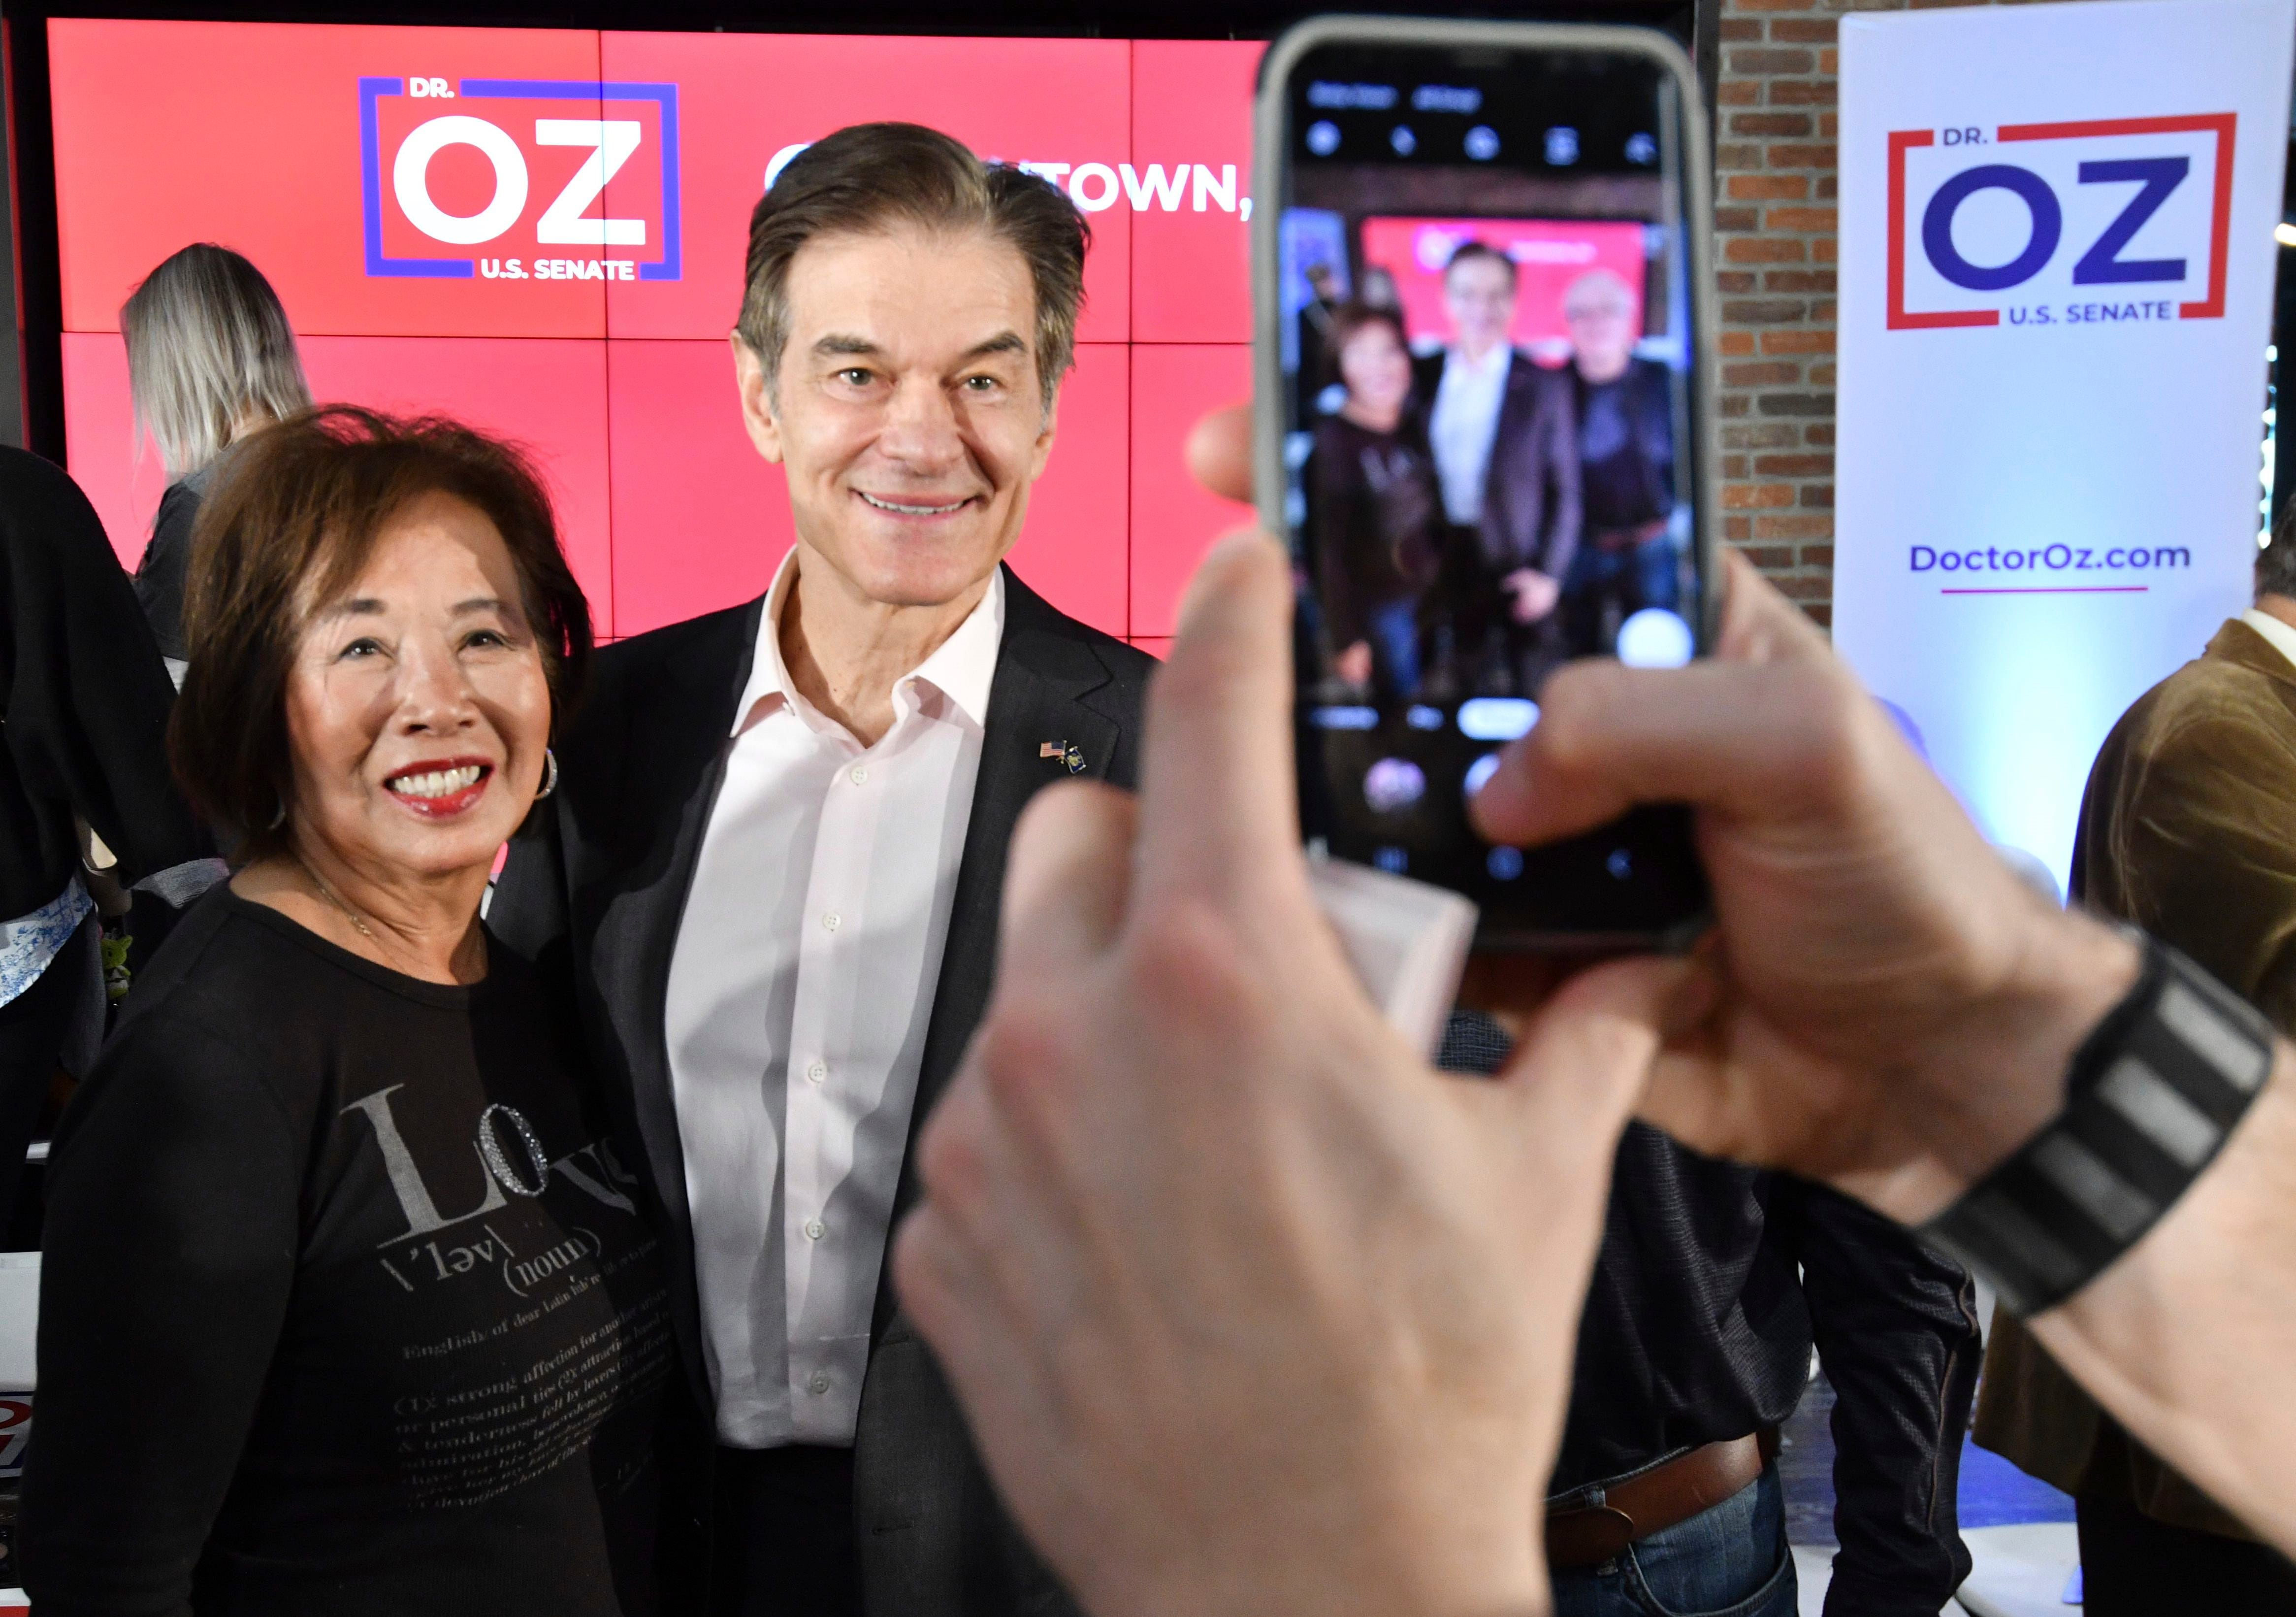 Dr. Oz’s campaign is like his TV show